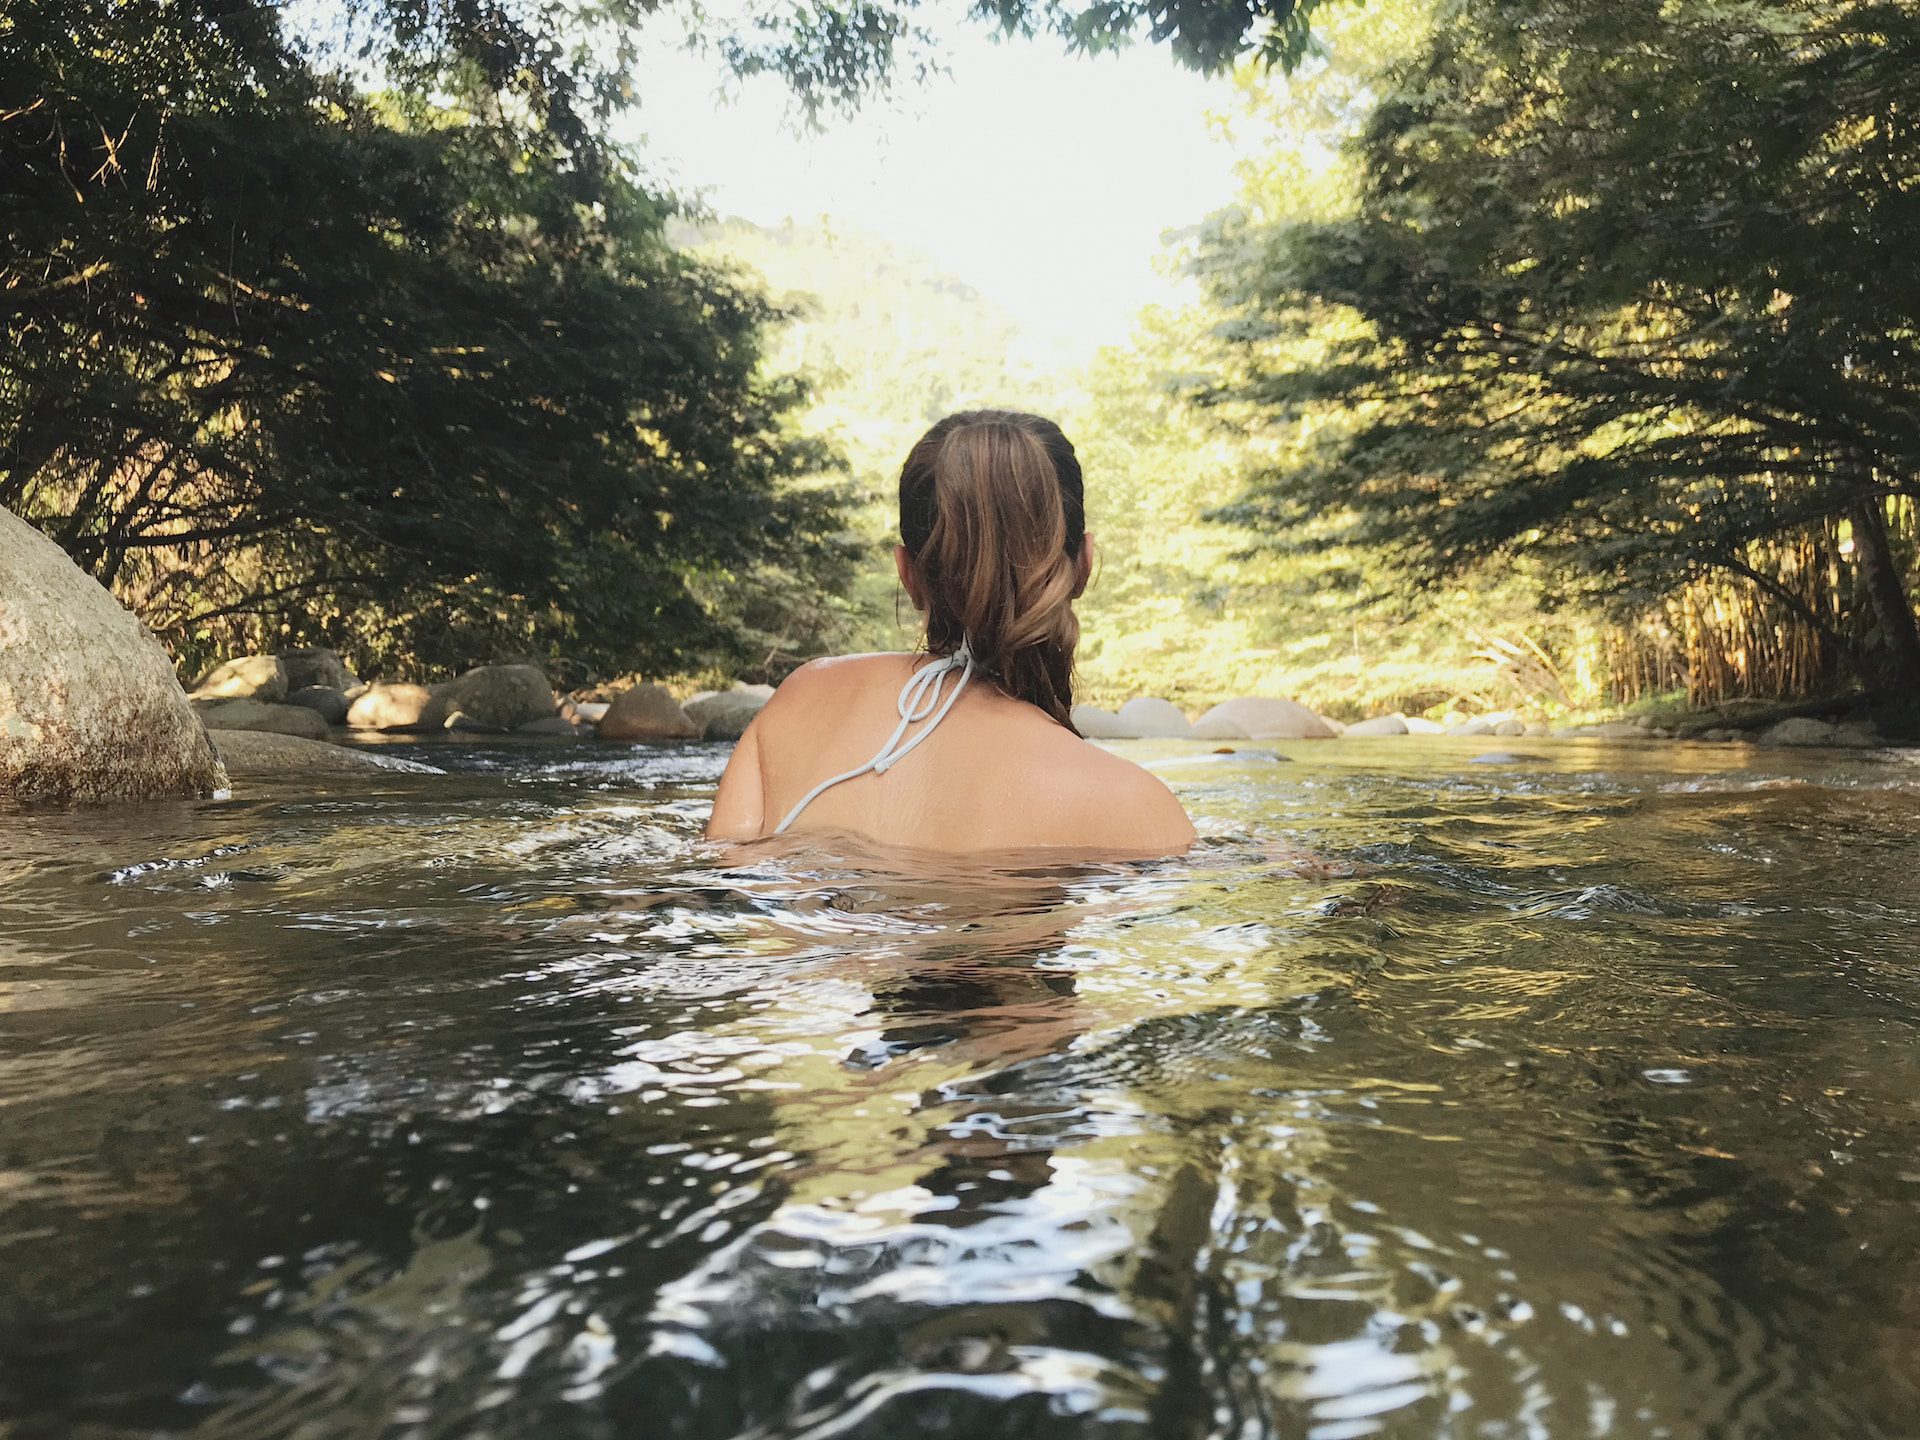 A woman submerged up to her shoulders in a swimming hole with her back to us, surrounded by trees.